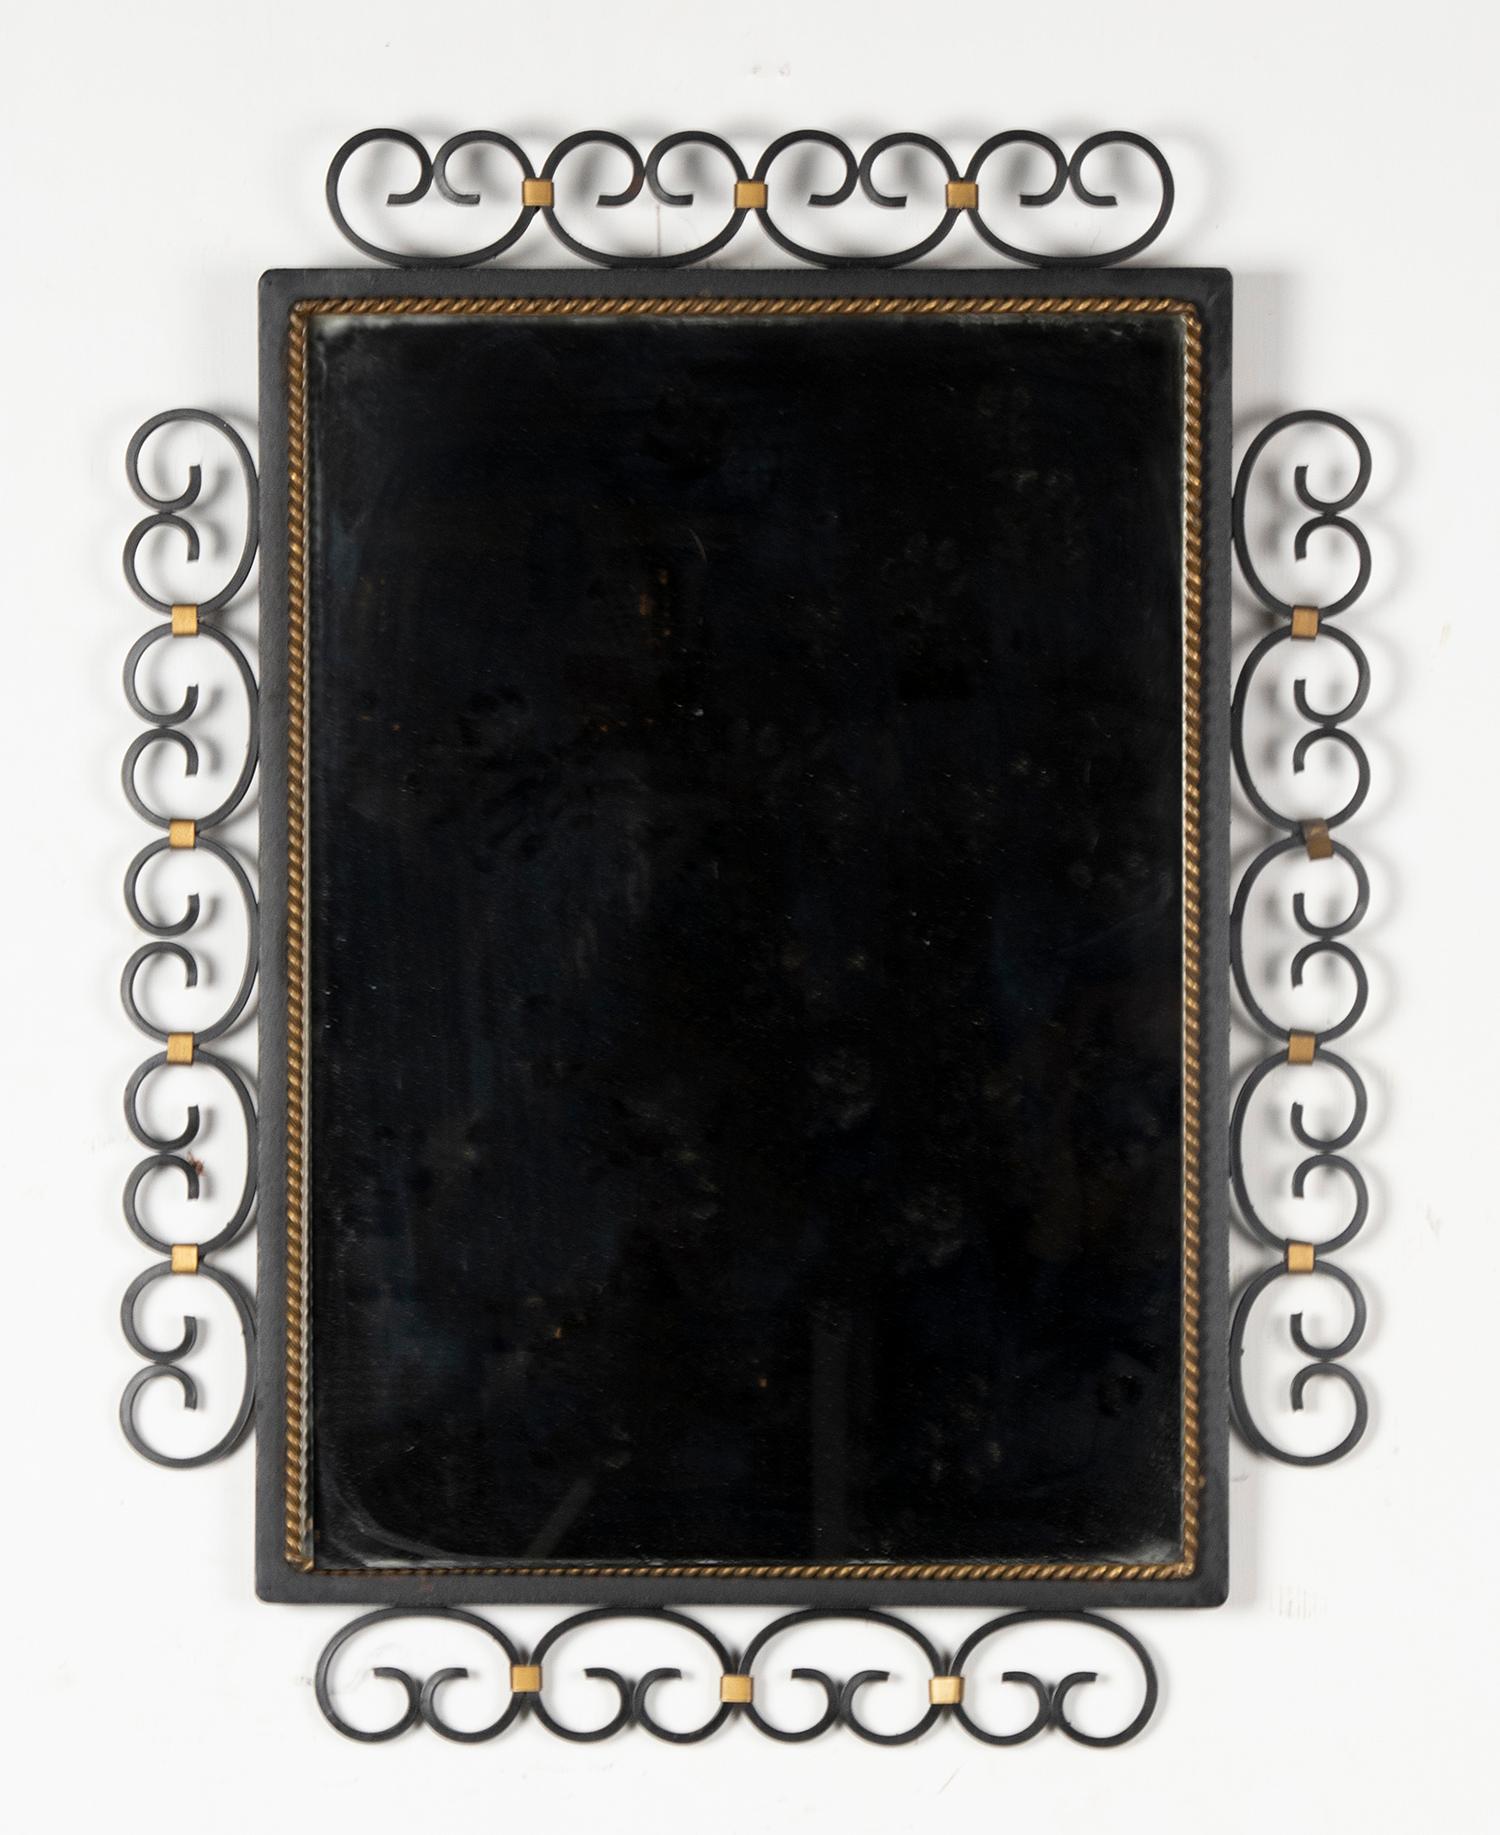 Beautiful Mid-Century Modern mirror, with a frame made of wrought iron. The mirror comes from France, dated circa 1950-1960.